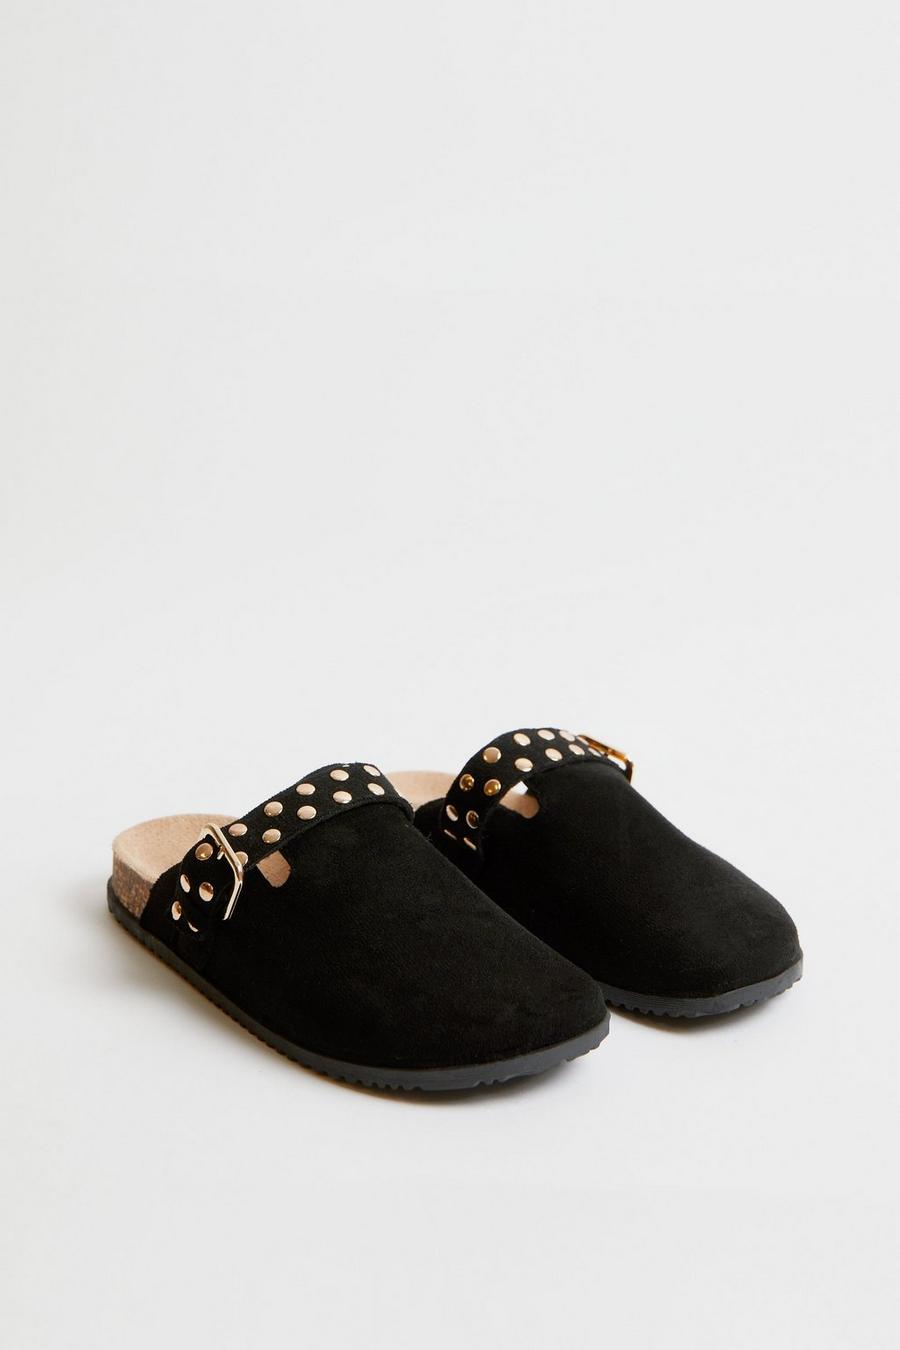 Faux Suede Studded Buckle Mule